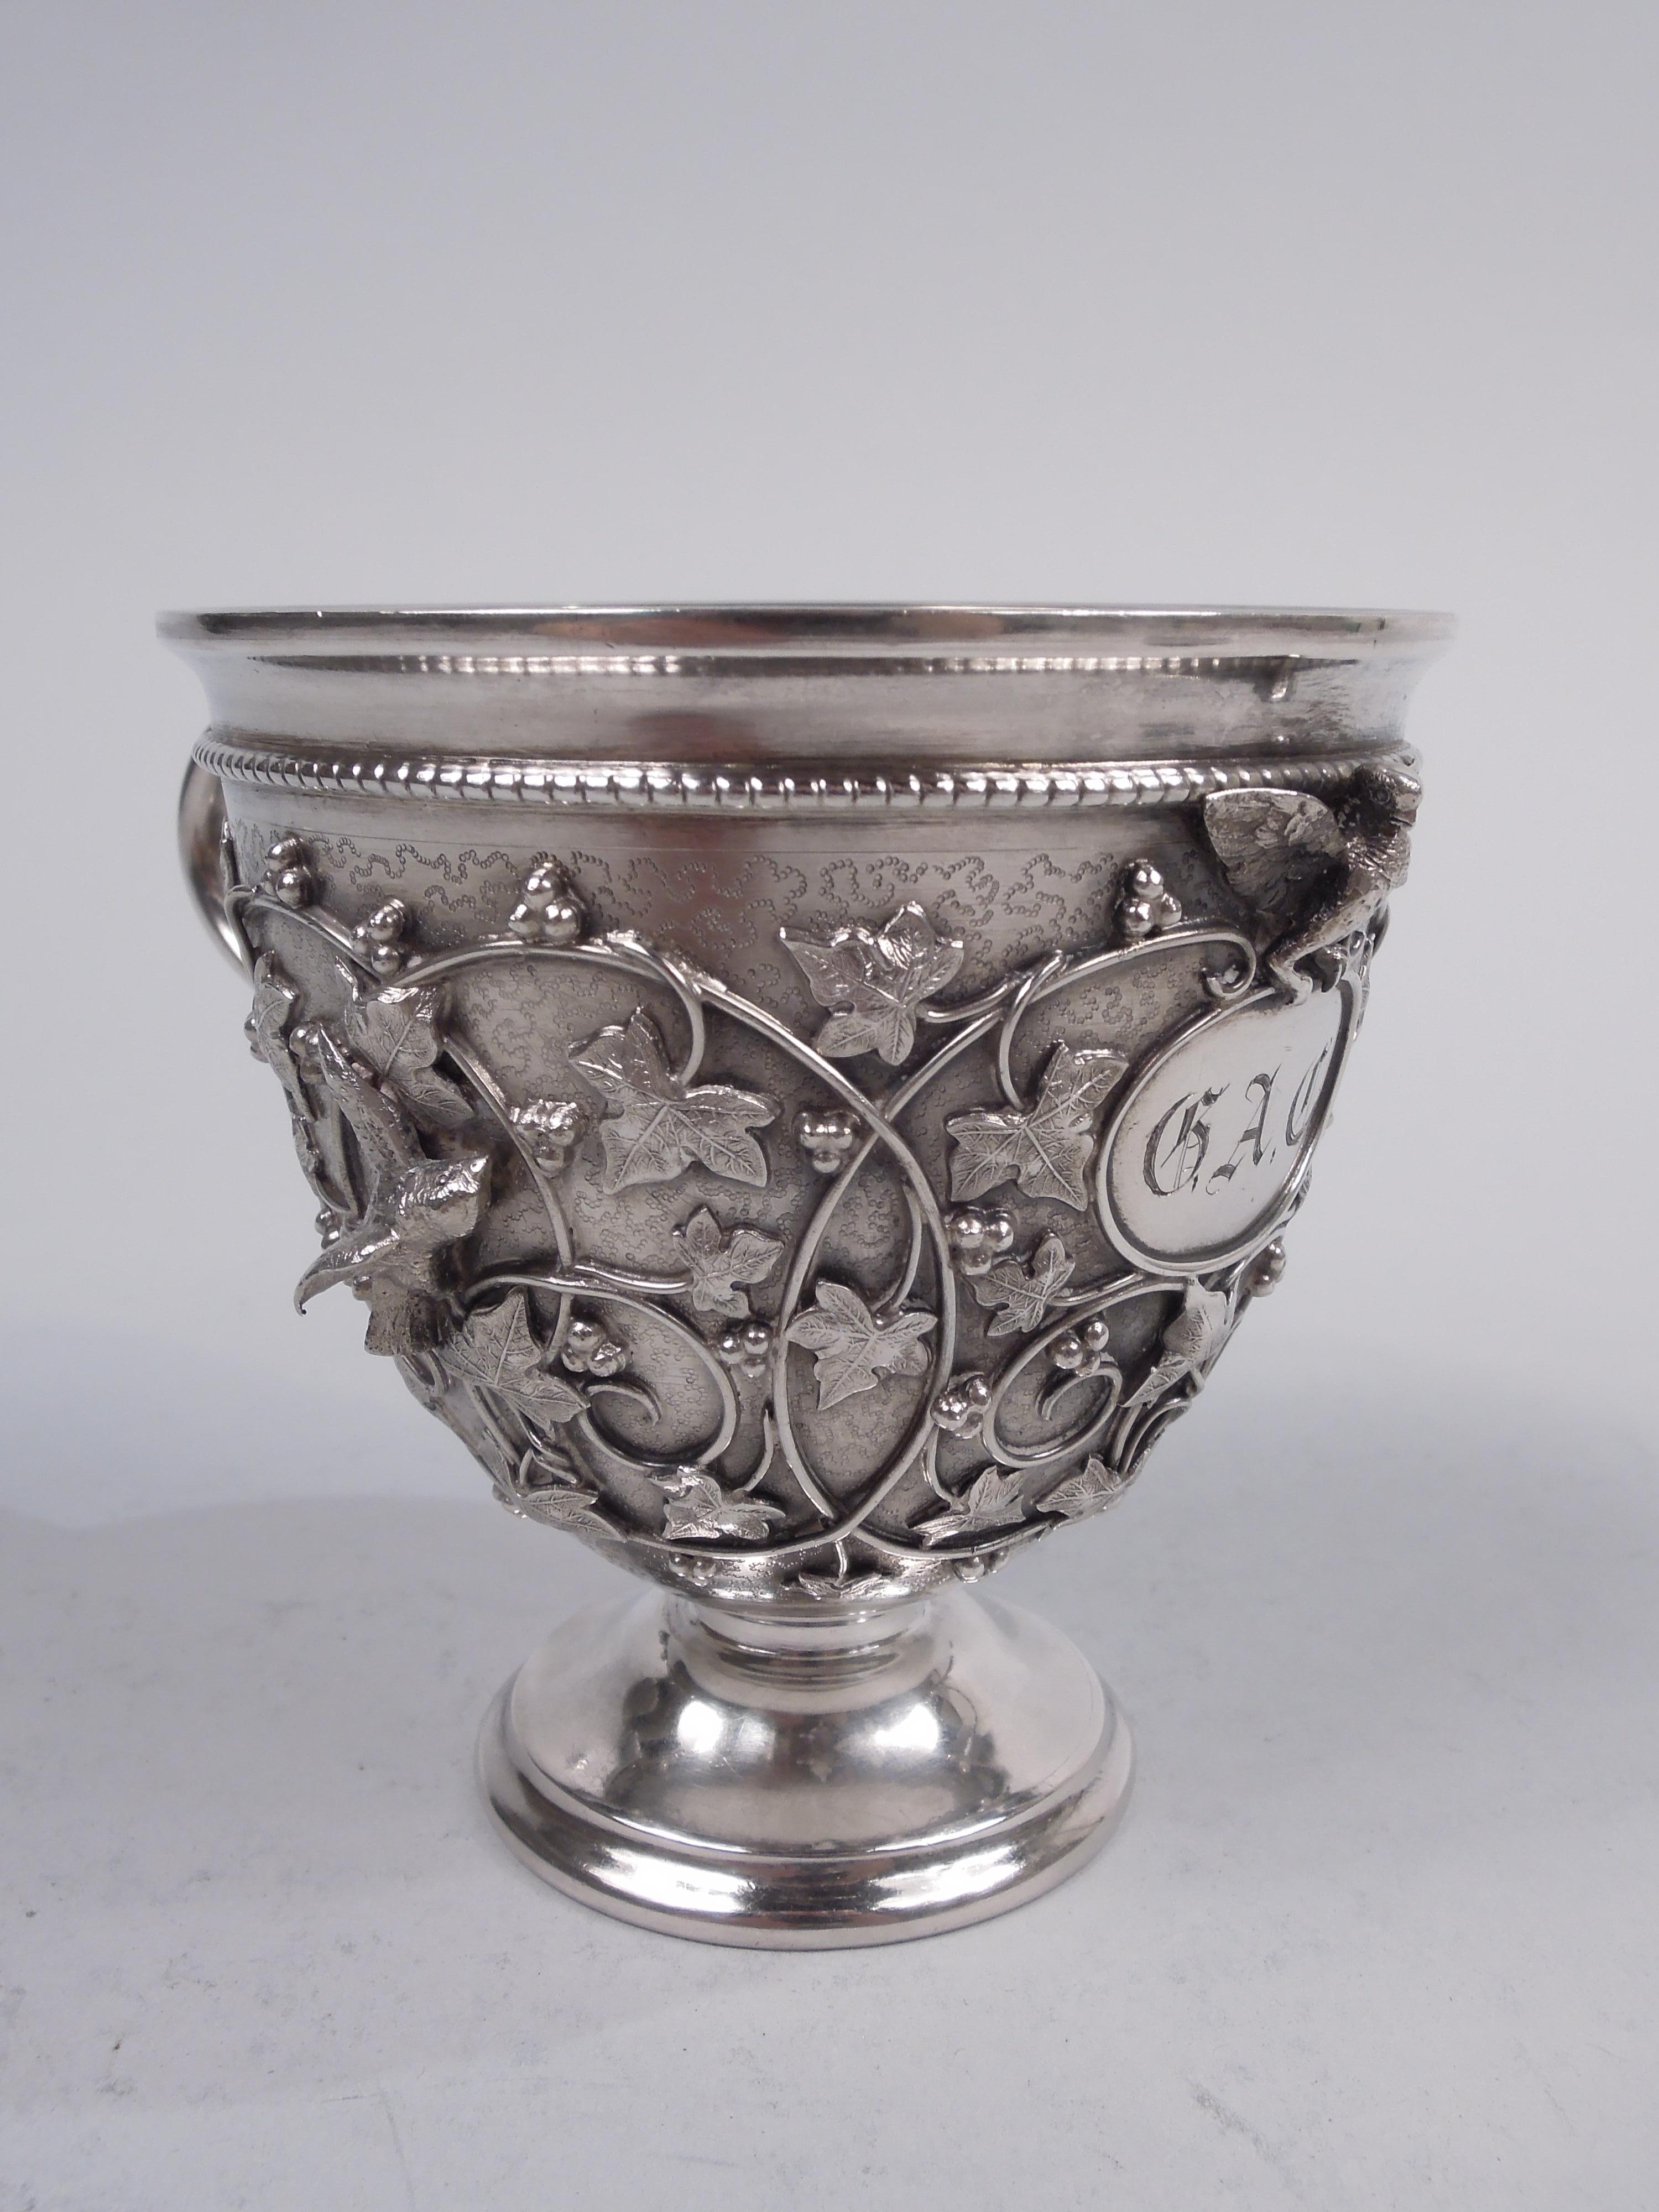 Rare Bird's Nest sterling silver baby cup. Made by Tiffany & Co. in New York, ca 1870. Ovoid bowl on stepped foot. Scroll handle with squiggle tail. Bowl has shaped pointille ornament and wire scrollwork applied with cast fluttering and flapping